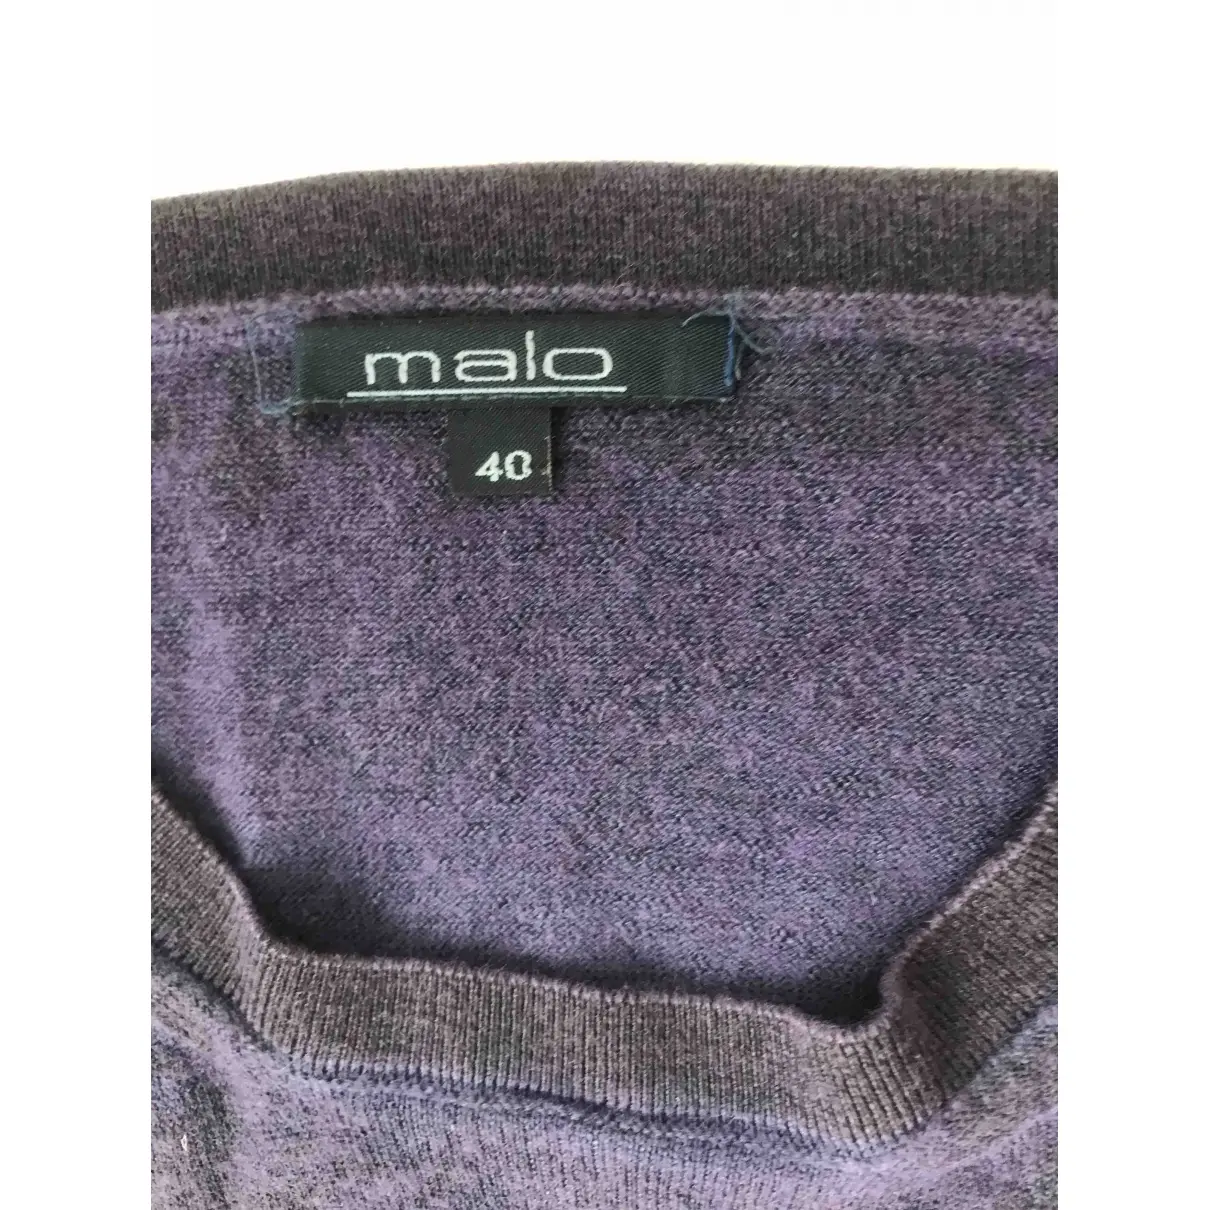 Buy Malo Cashmere top online